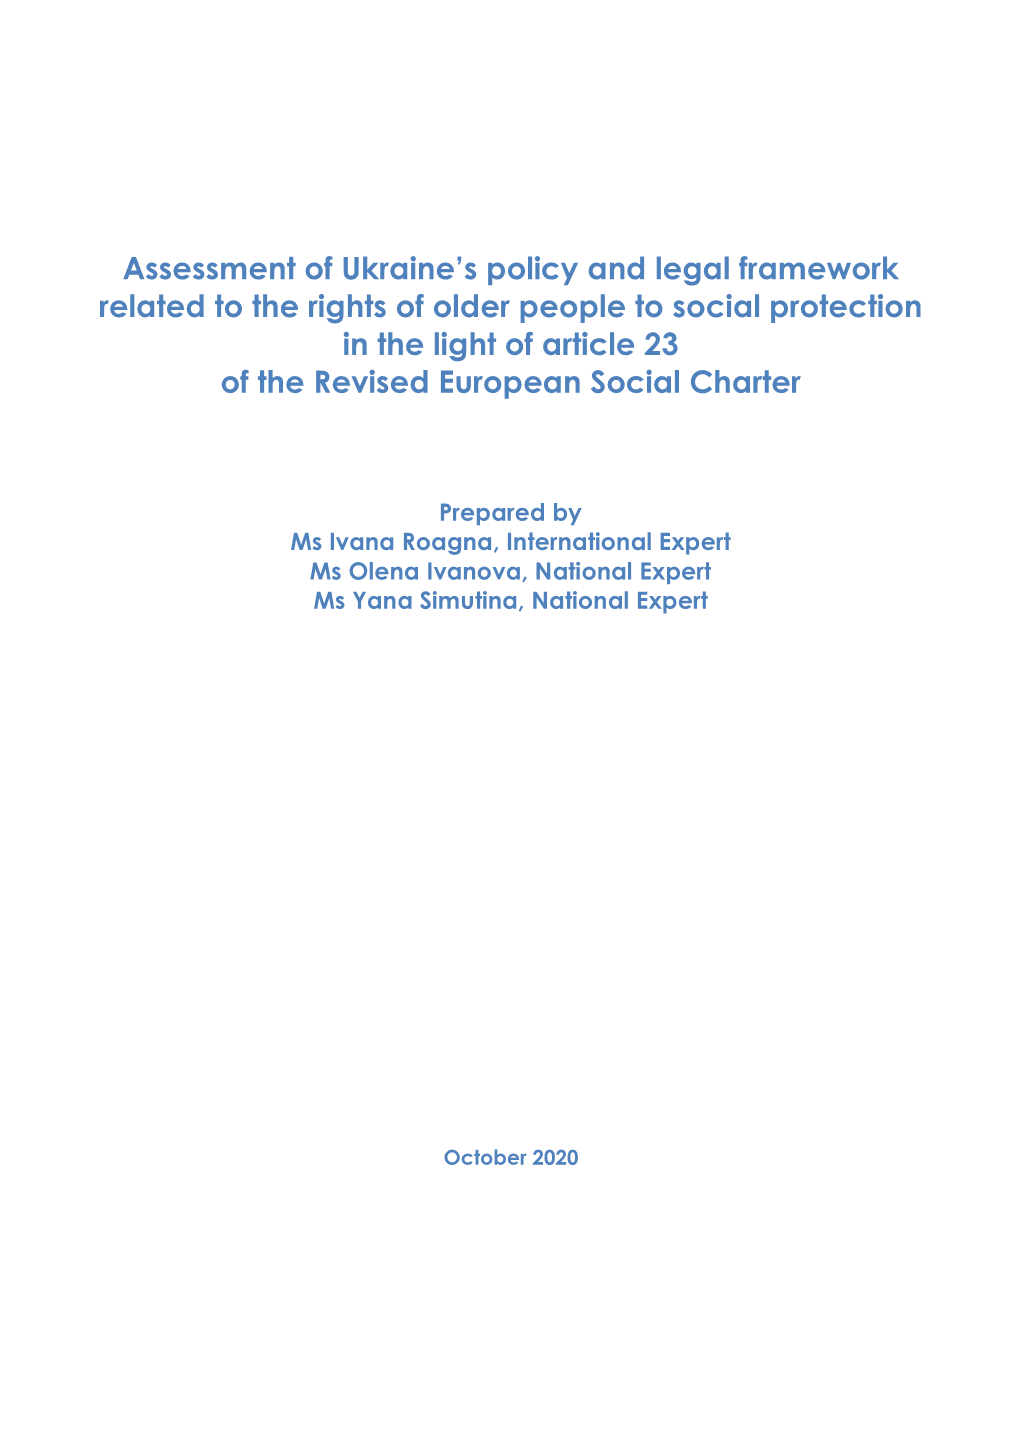 Assessment of Ukraine's Policy and Legal Framework Related to the Rights of Older People to Social Protection in the Light Of